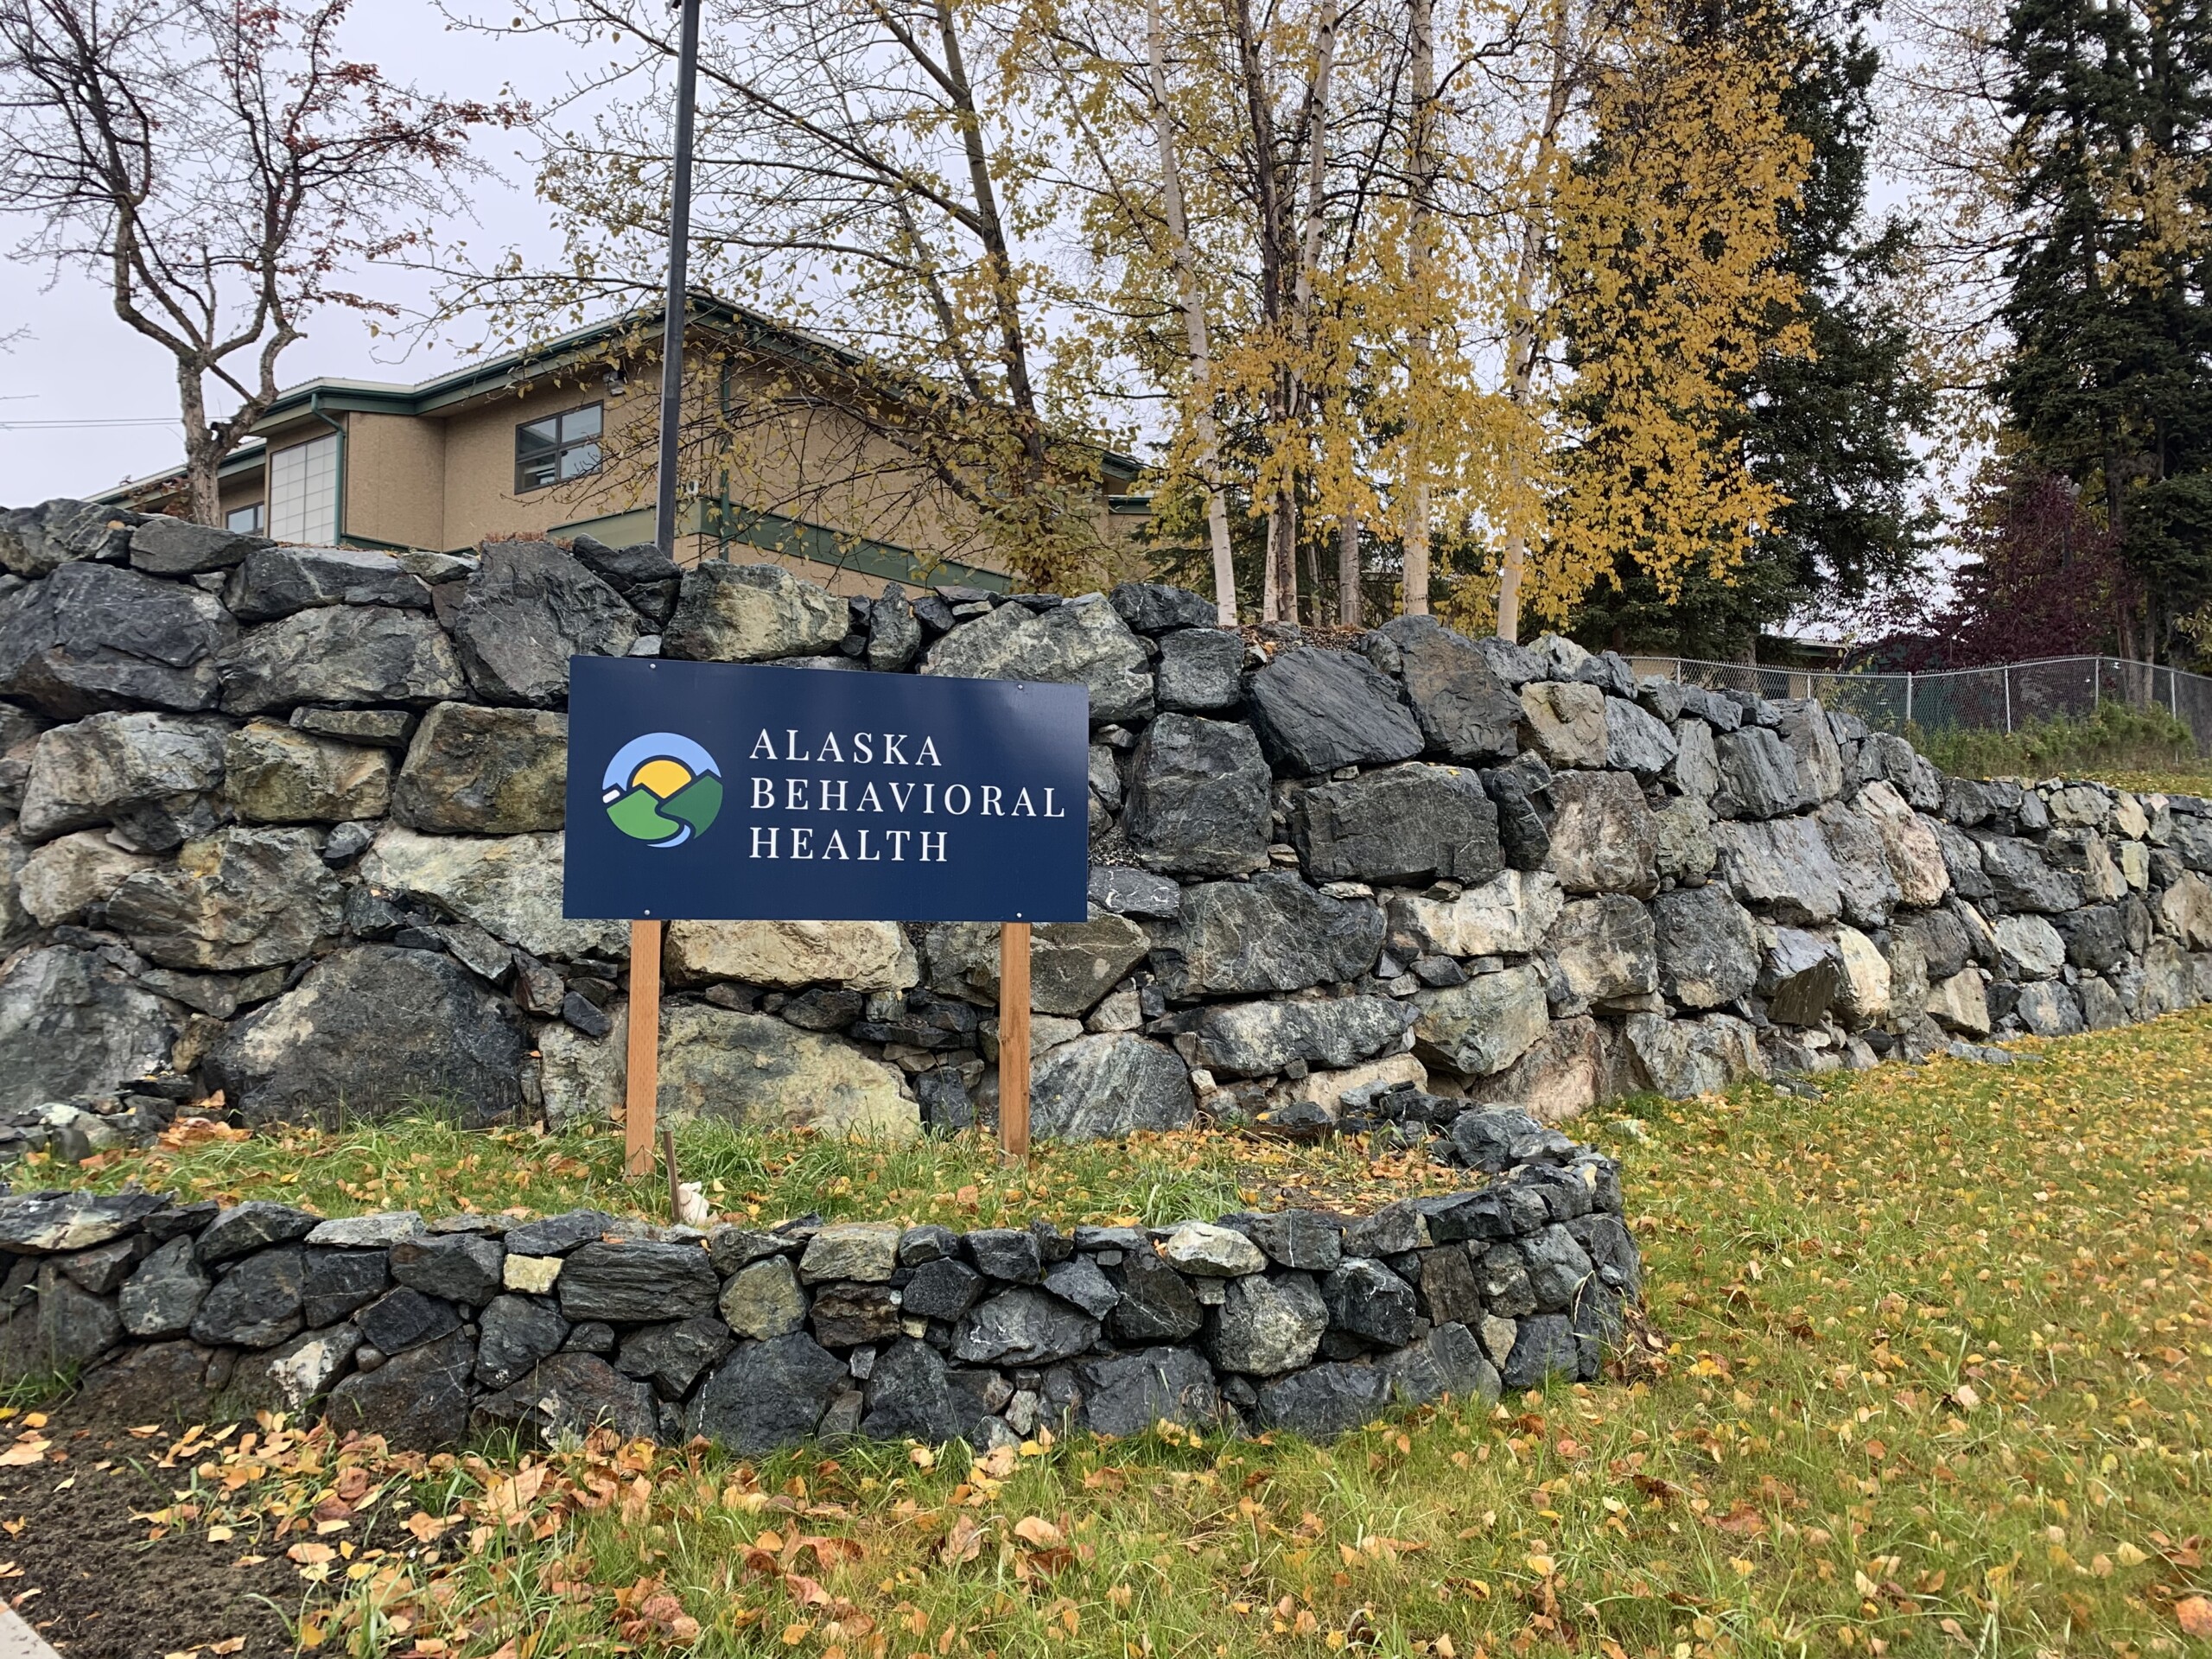 fall scene of retaining wall and sign that says Alaska Behavioral Health